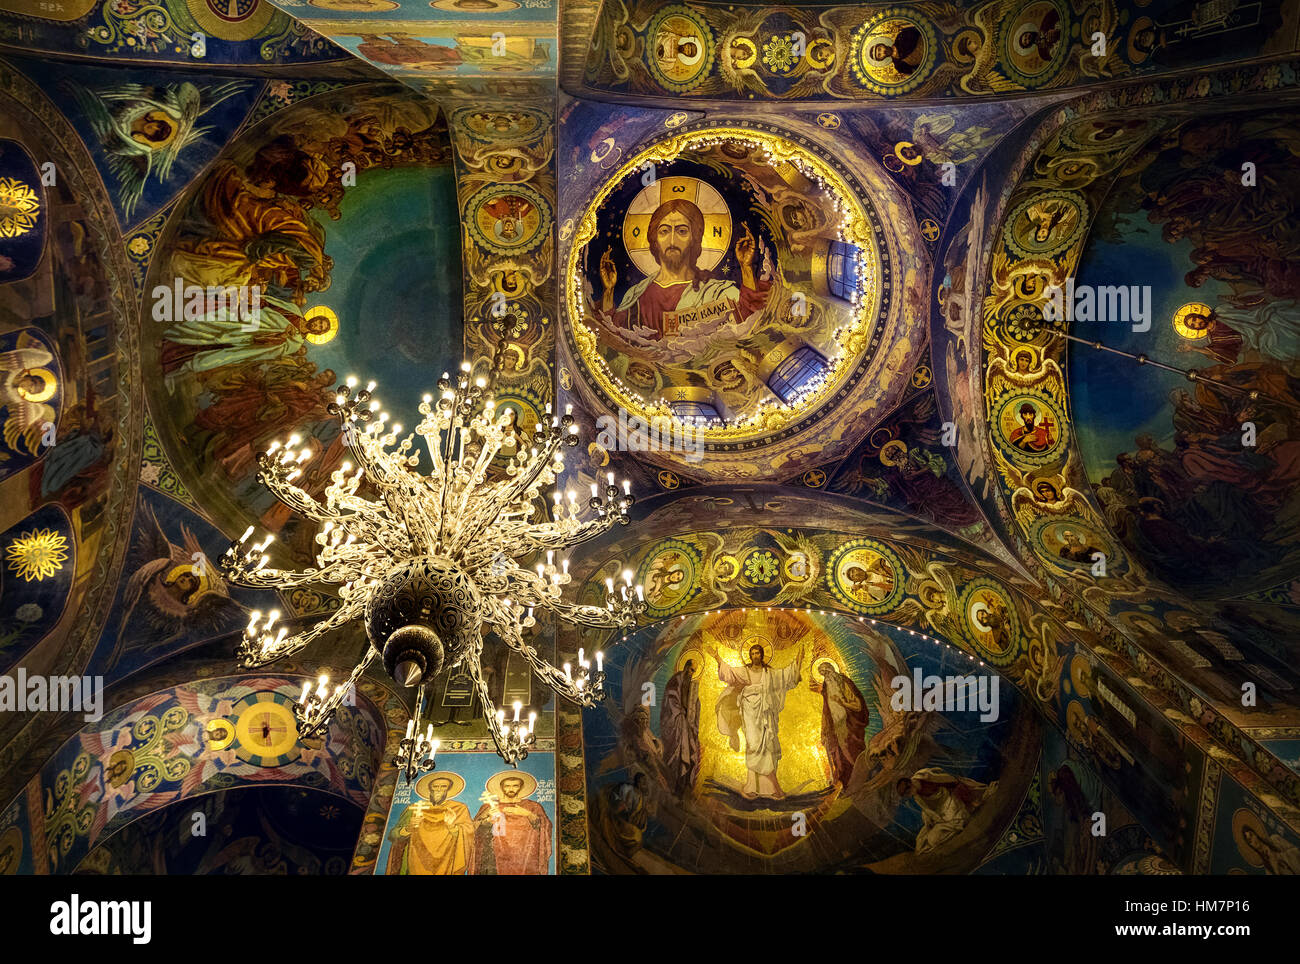 Interior of the Church of the Savior on Spilled Blood in Saint Petersburg, Russia Stock Photo